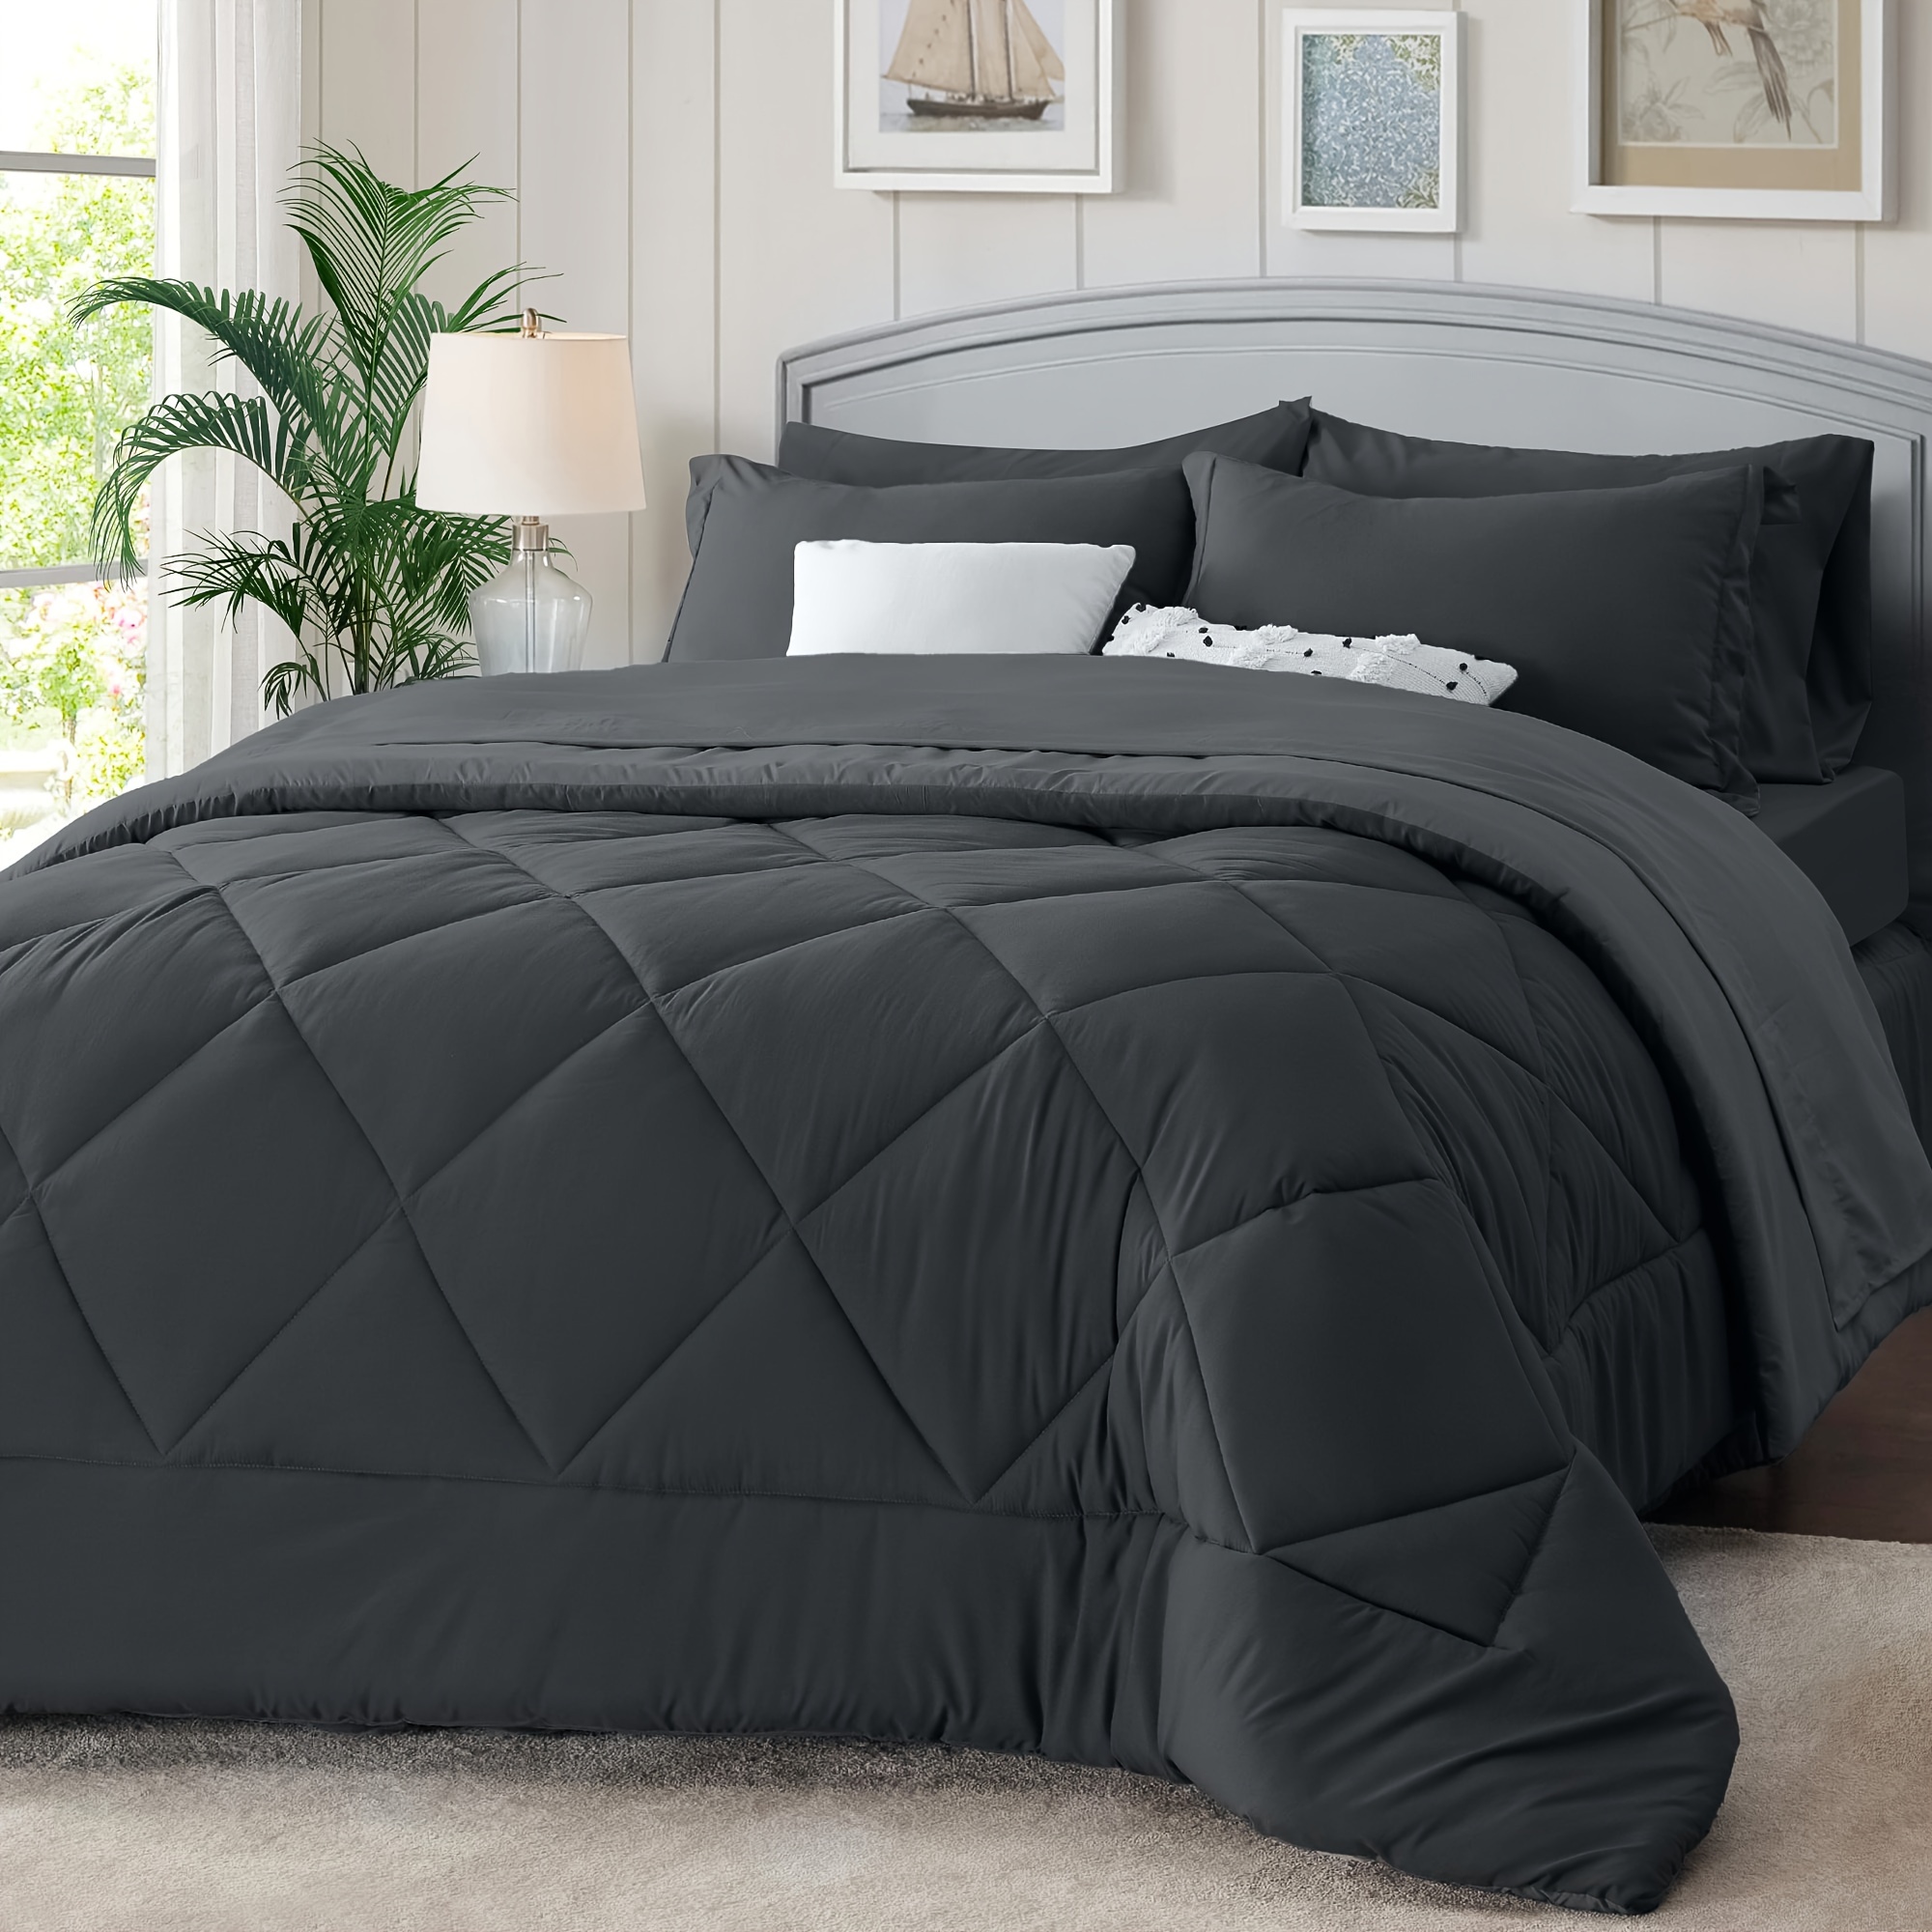 

Dark Grey King Size 200gsm Comforter Set - 7 Pieces Reversible Bed In A Bag Bedding Set For Bedroom All Season With Comforter, Flat Sheet, Fitted Sheet, 2 Pillow Shams, 2 Pillowcases